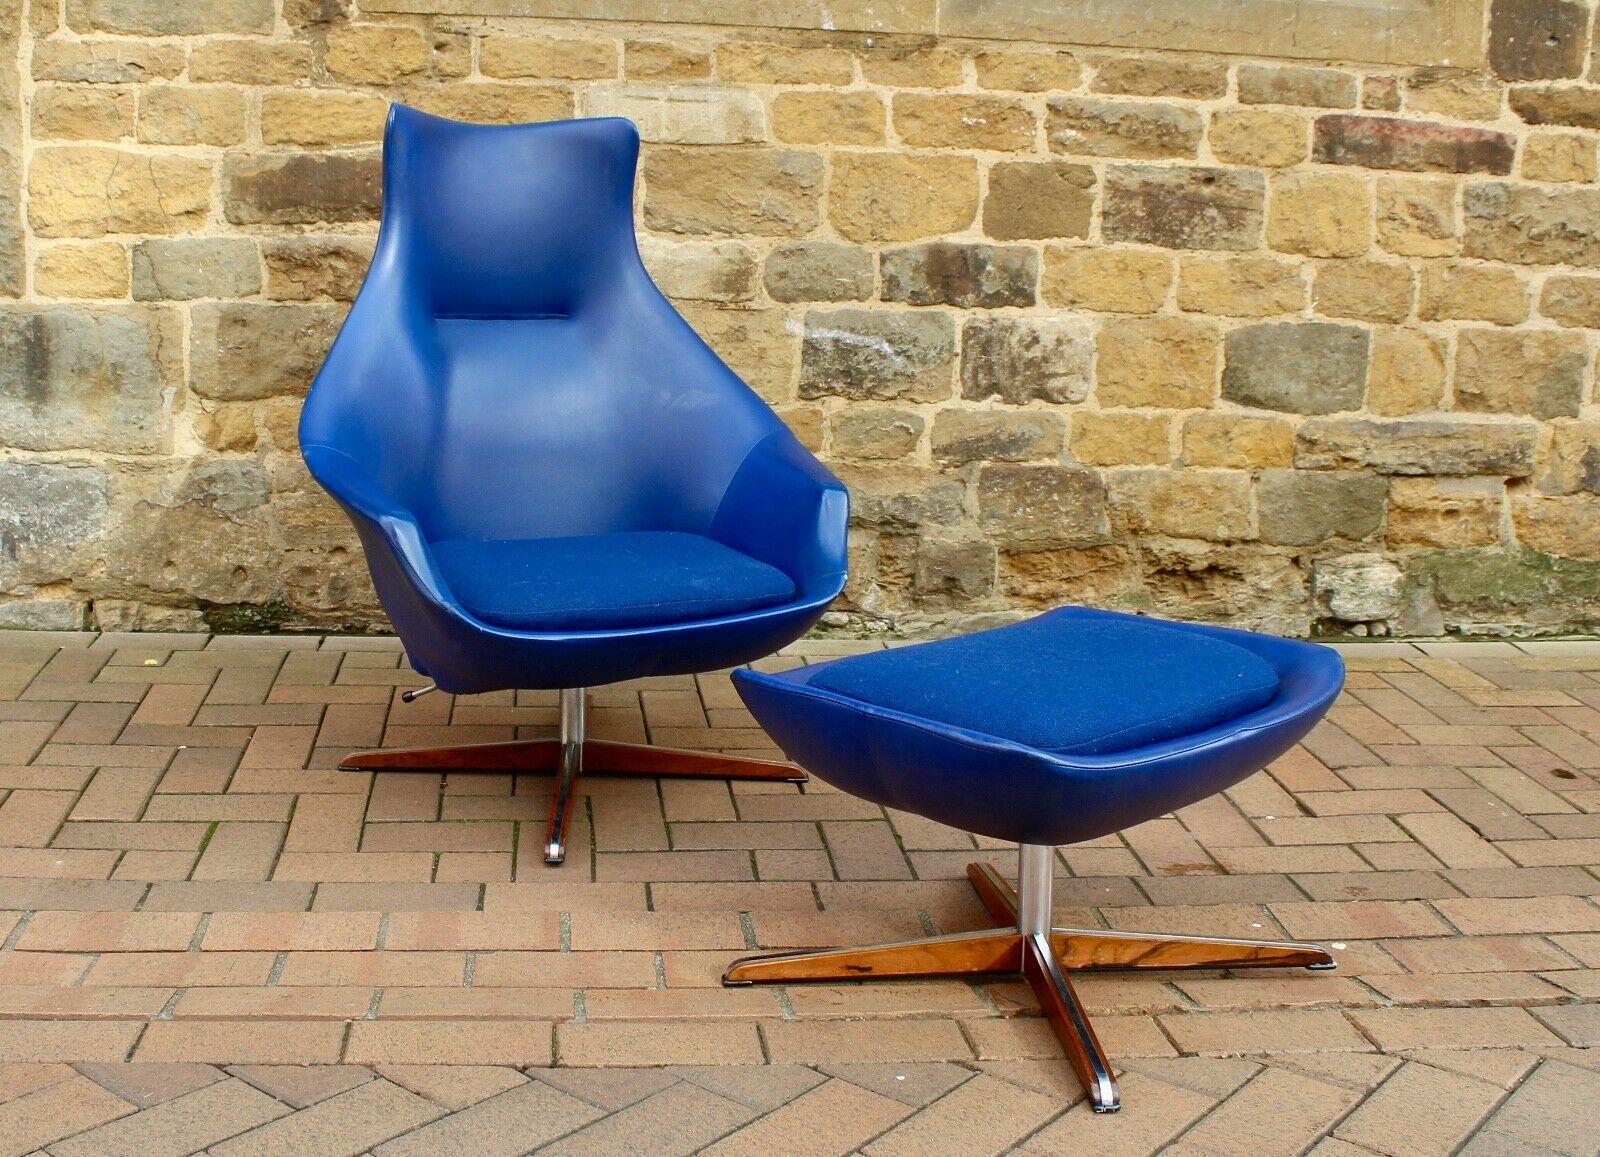 These are an extremely rare original circa, 1960s lounge chair with matching footstools by British designer Peter Hoyte.

This chair is covered in its original electric blue vinyl blue with beautiful steel and rosewood bases and the original Peter